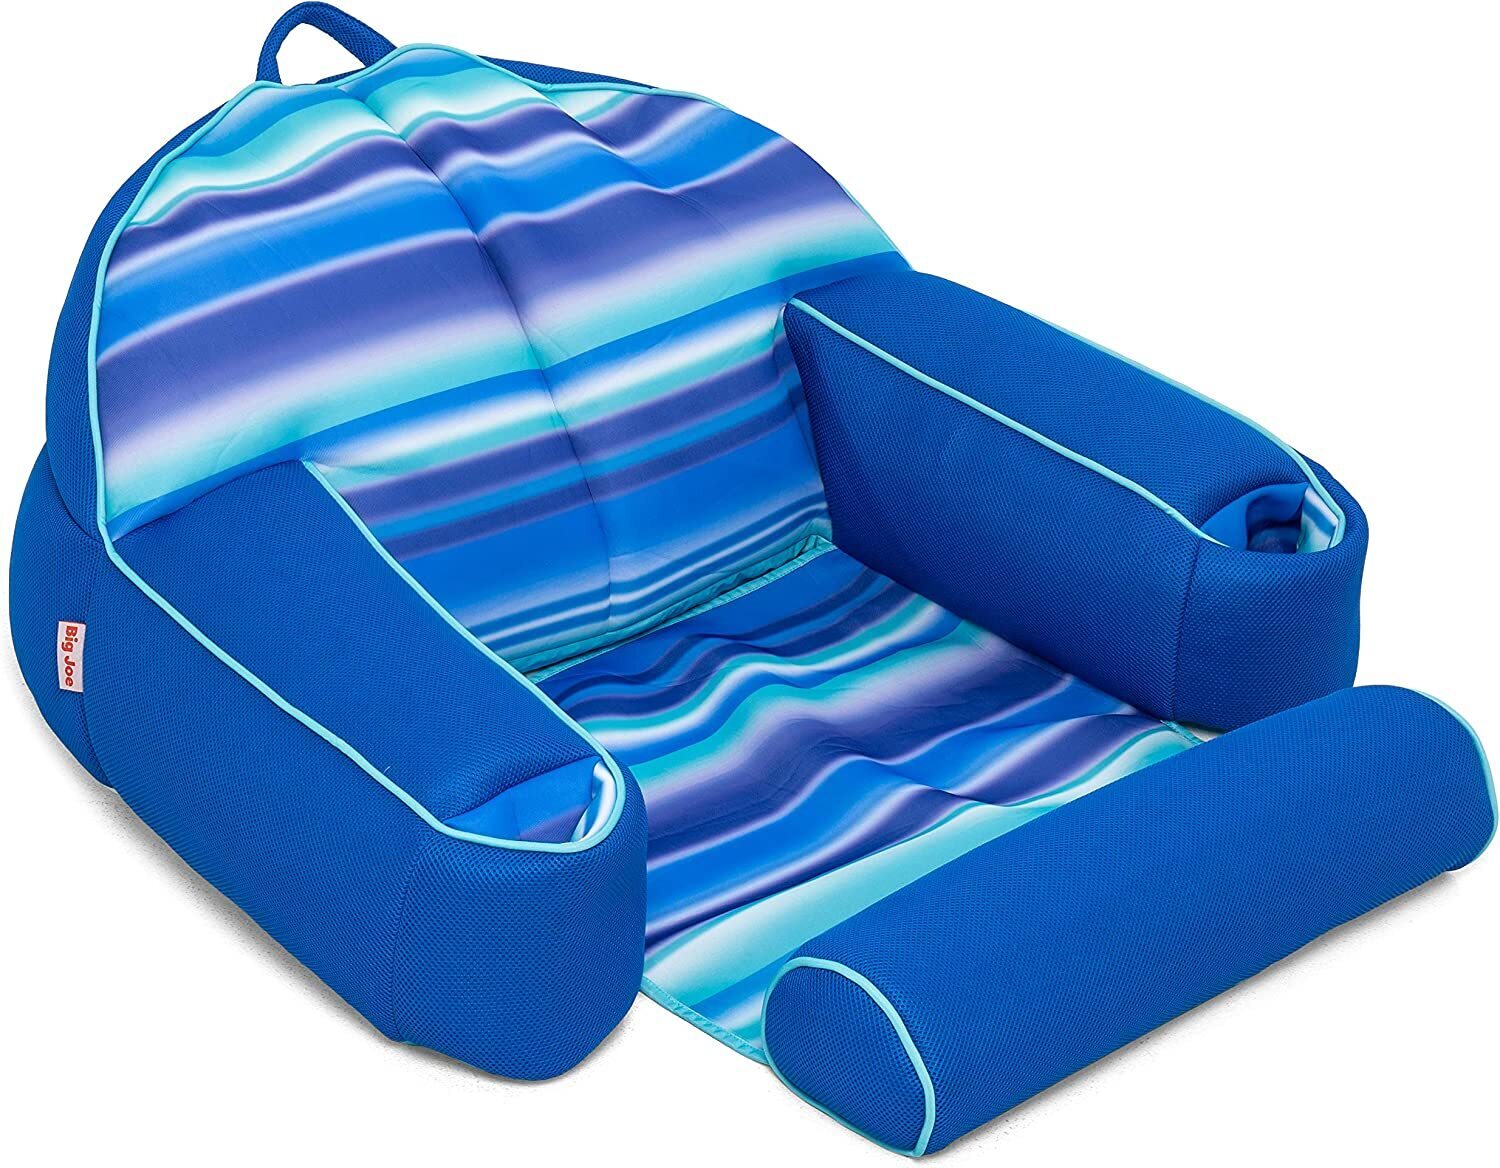 Blue and Teal Floating Pool Chair